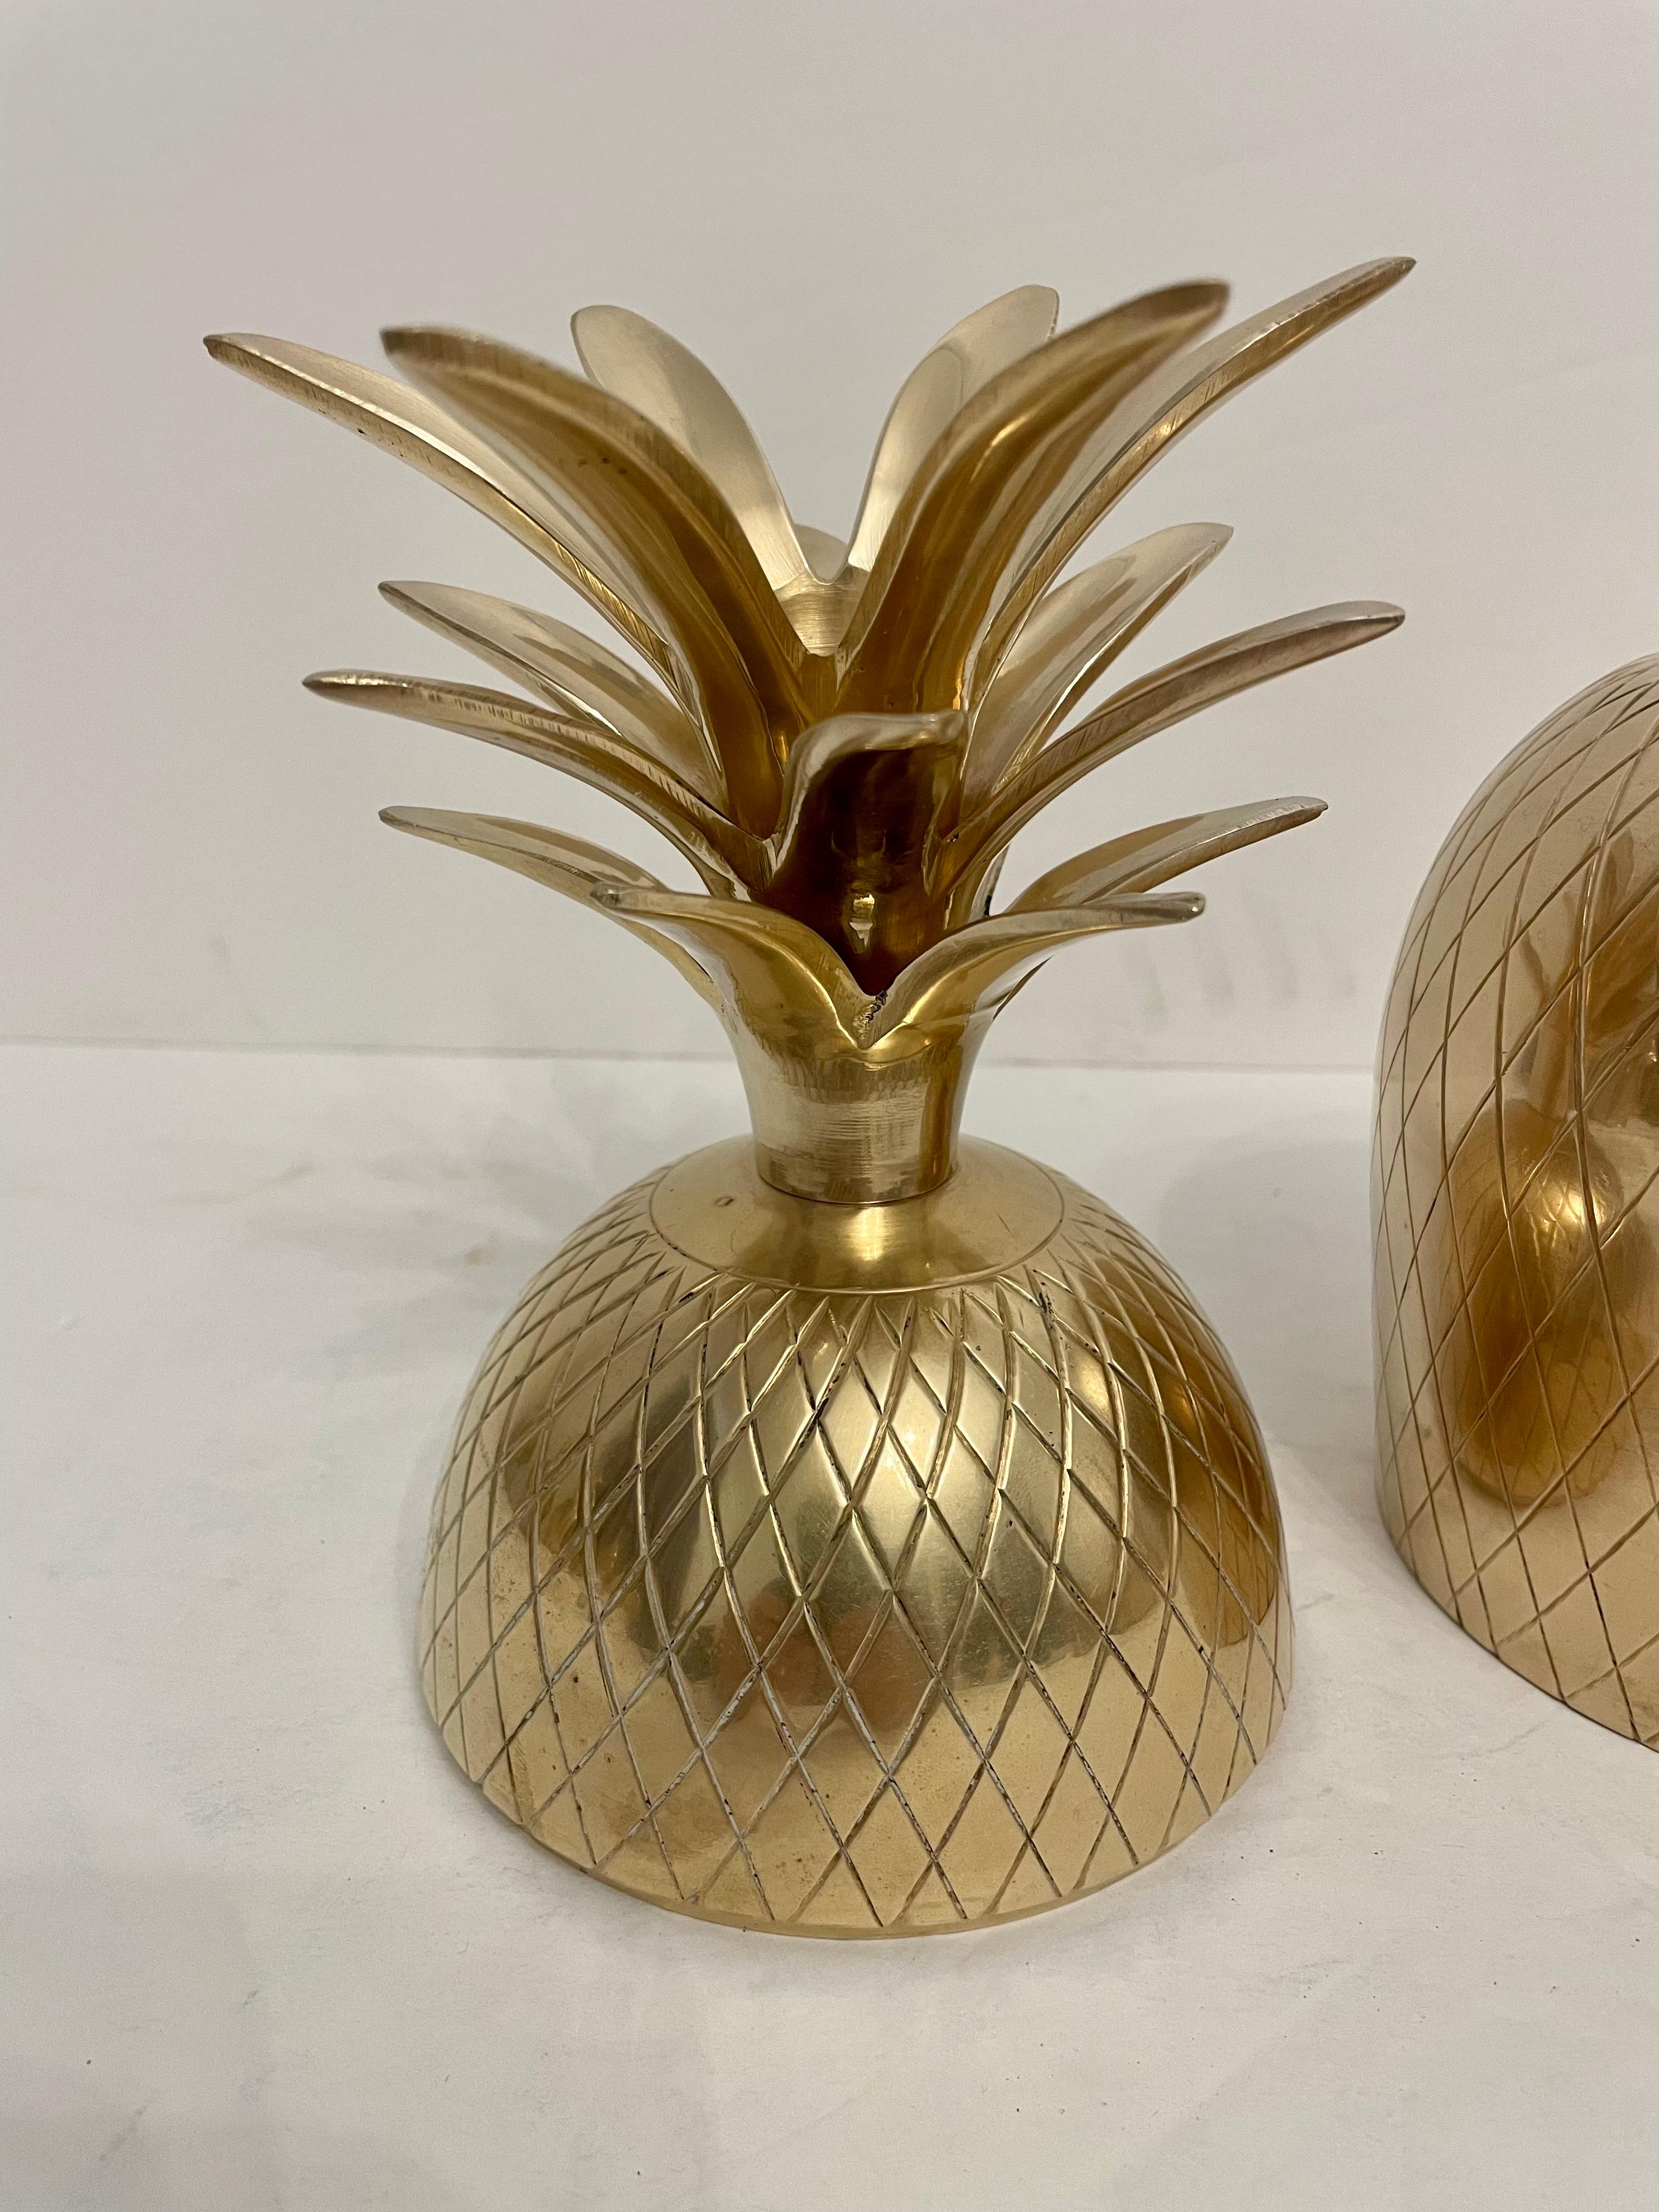 Brass pineapple shaped covered container. Good overall condition. Any dark areas in photos is reflection. Hand polished. Measures: 11.5” tall x 5.25” diameter.